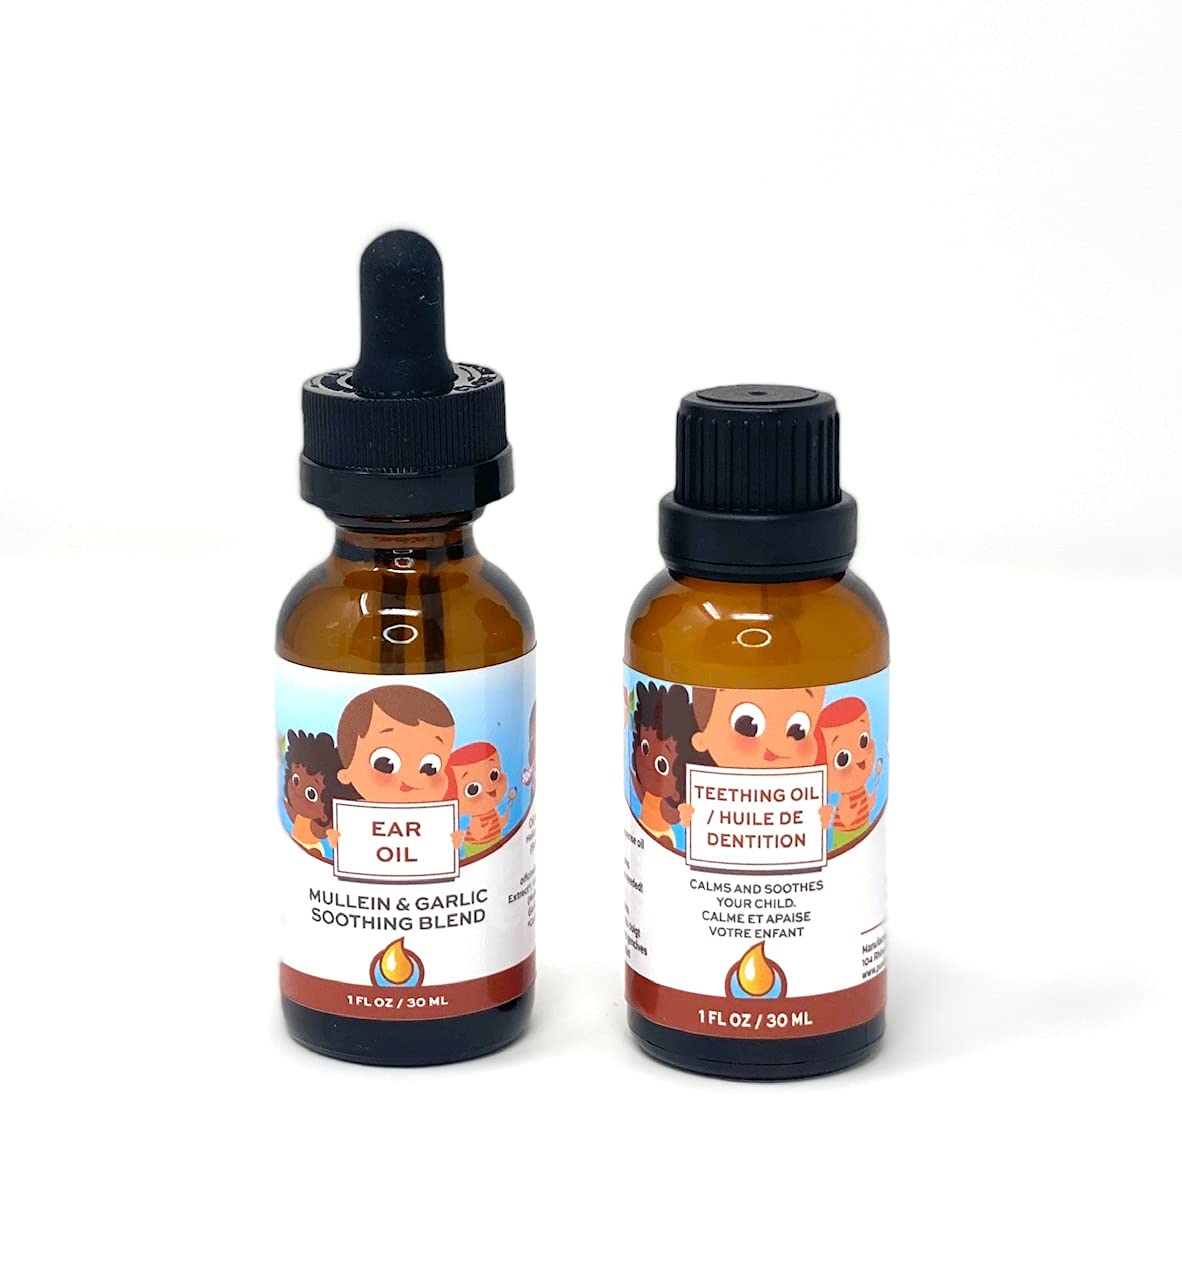 Punkin Butt Teething Oil and Ear Oil for Sore Gum and Ear Canal Relief | All Natural, Organic, Safe for Infants, Chemical-Free